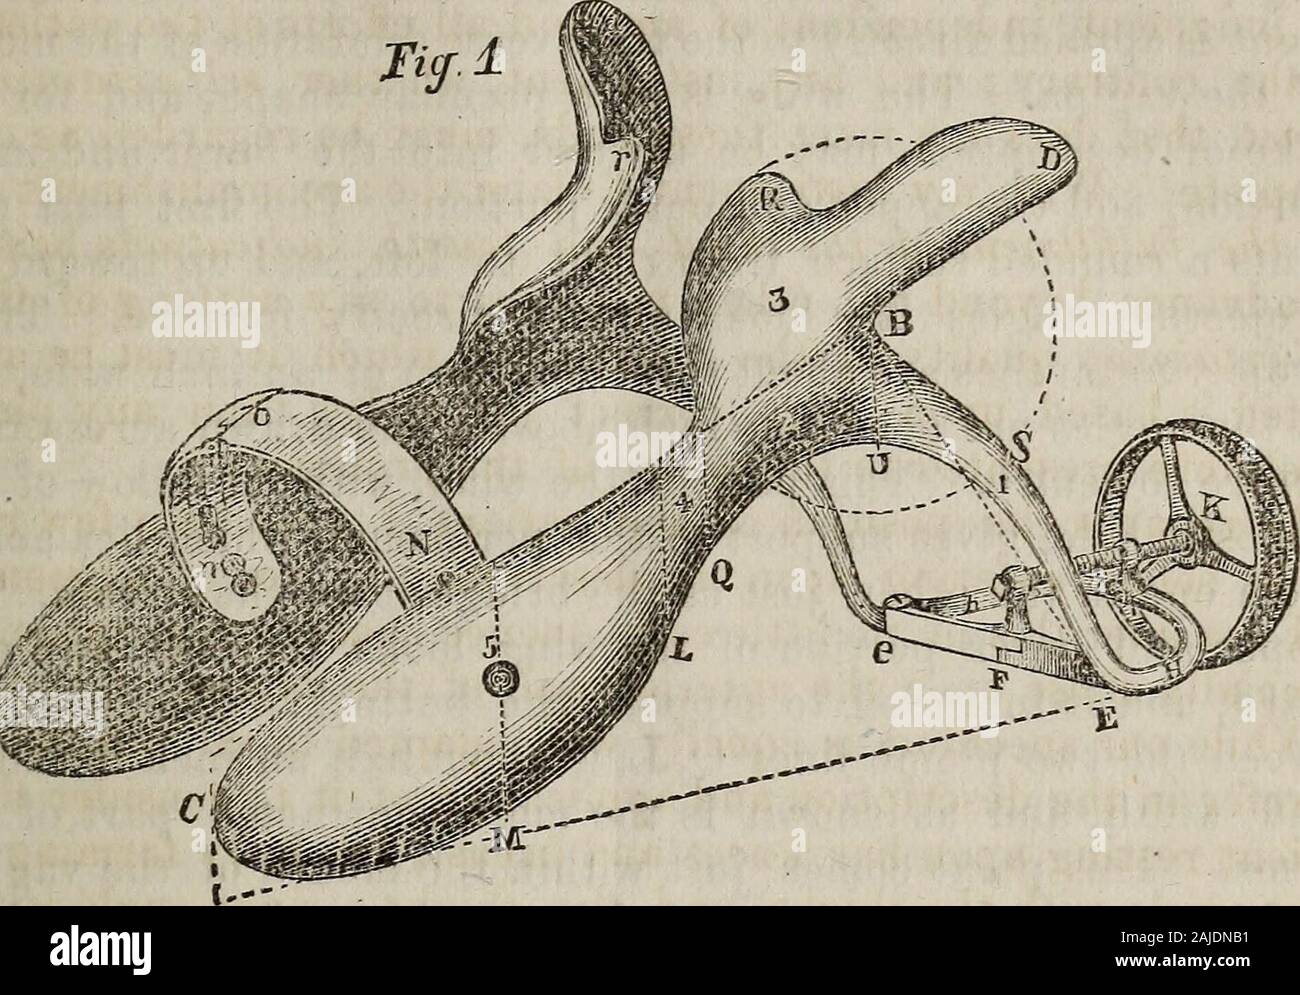 The Richmond medical journal . before long to be able topublish a description of this thoracic rest or support. We have come now to the most difficult part of our task, adescription of this speculum. Fig. 1 (half size) represents a front quarter view of the in-strument, expanded as* when introduced for use. The general features of it as shown, are outstretched arms,expanded wings, rolling surfaces, standing and projectingarches, broad, contracted, narrow and rounded points; and thethumbscrew arrangement indicates that the whole is moved bya system of leverage. The proportions of the instrument Stock Photo